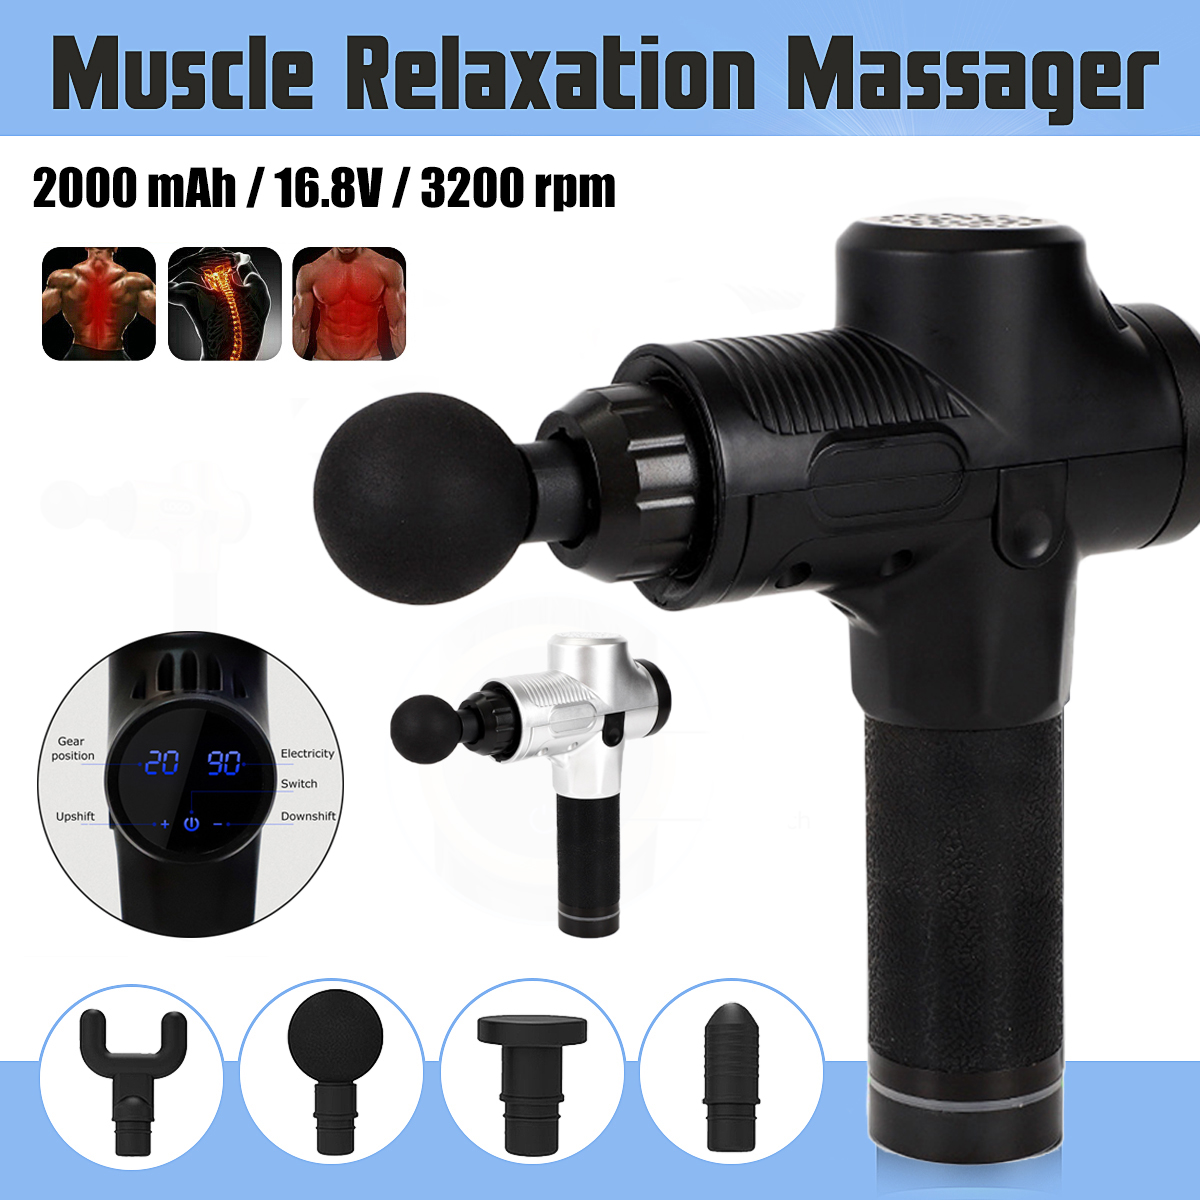 168V-2000mAh-Touch-Screen-20-Speed-Fascia-Muscle-Relaxation-Massager-Display-Gym-High-Frequency-Vibr-1581561-4